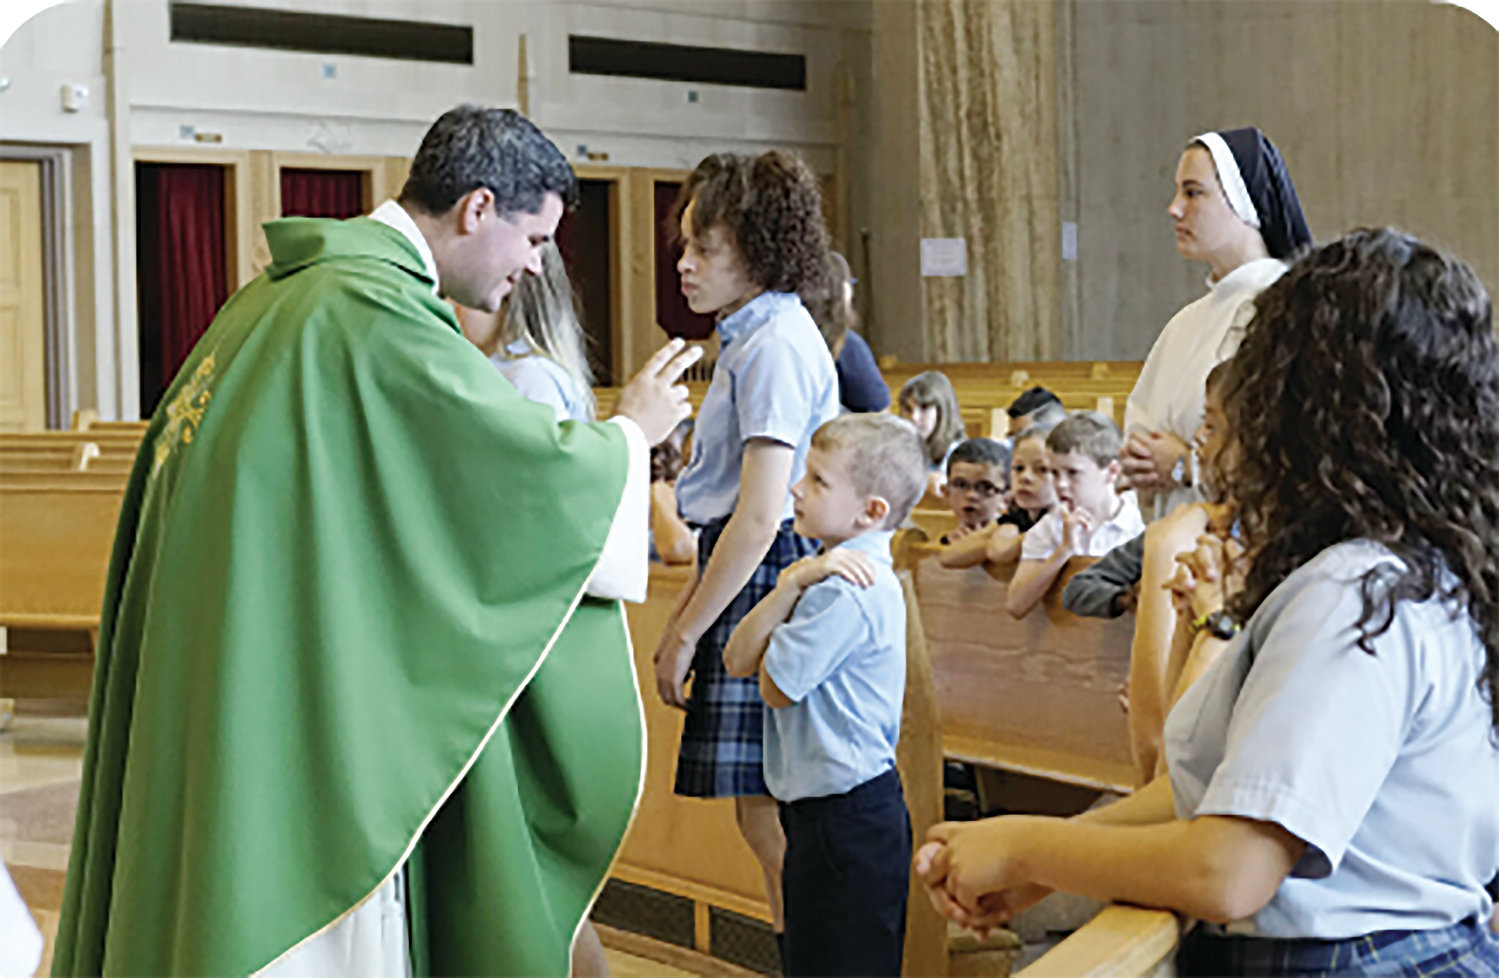 A St. Pius V student receives a blessing from Father Patrick Mary Briscoe, O.P., during a school Mass. The mission and foundation of Catholic education are directly related to evangelization, said Thomas Burnford, head of the National Catholic Educational Association.